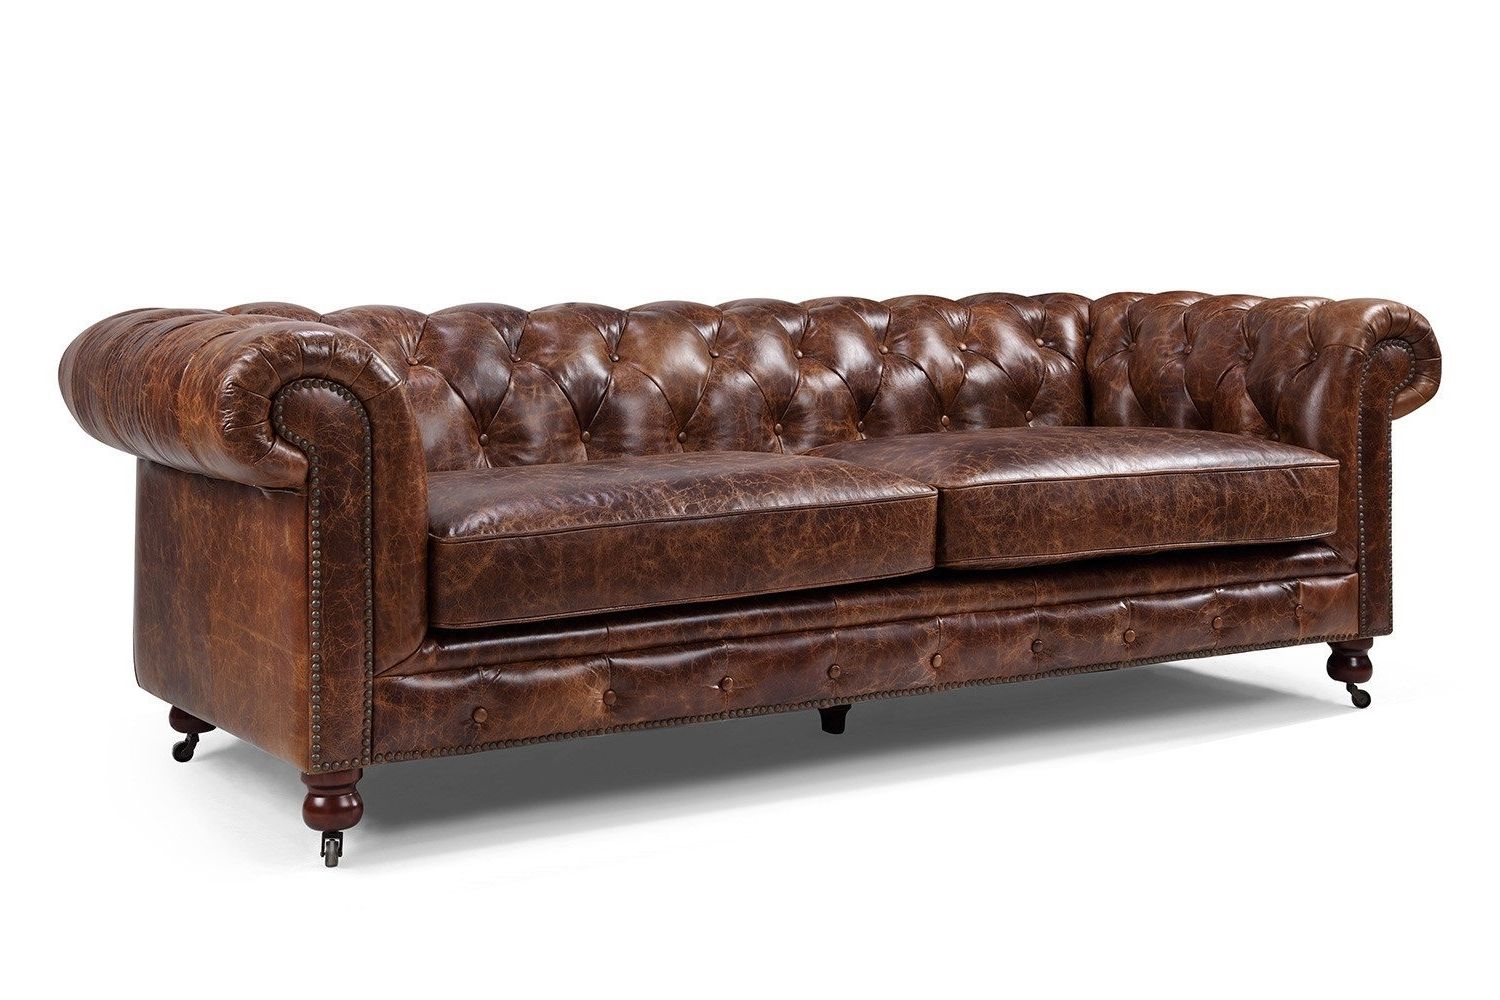 Tufted Leather Chesterfield Sofas Inside Popular Amazon: Kensington Chesterfield Tufted Sofarose & Moore (Photo 11 of 15)